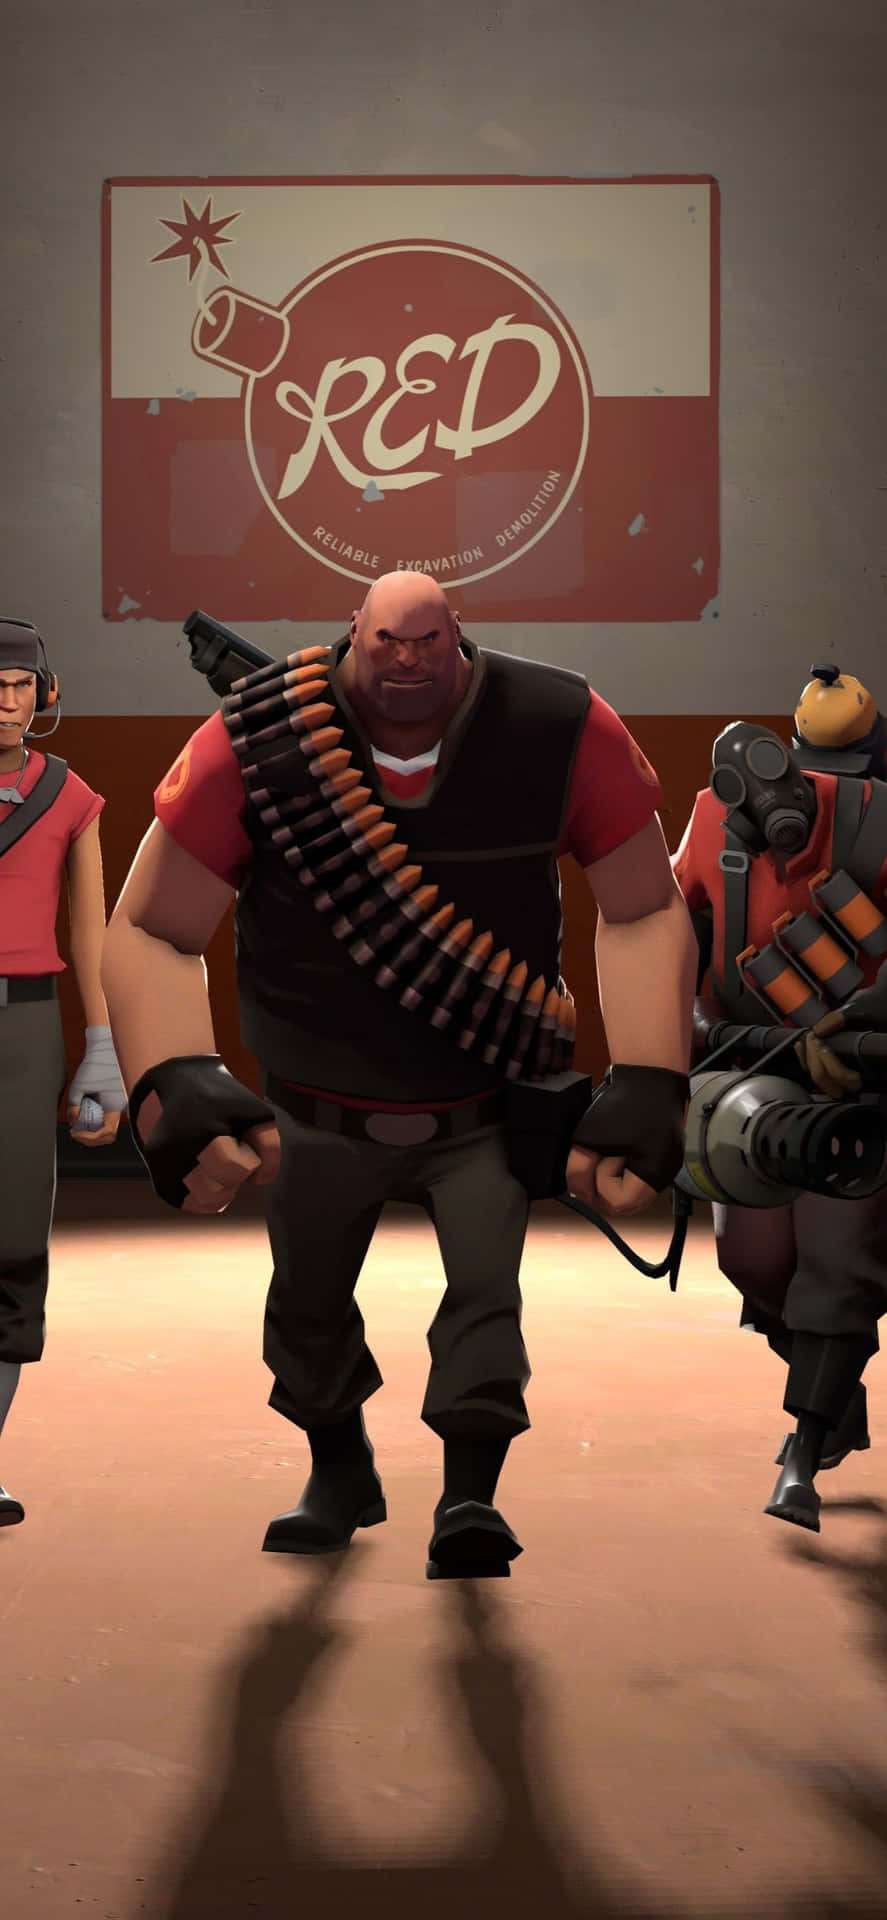 iPhone XS Team Fortress 2 Offensive Team Background